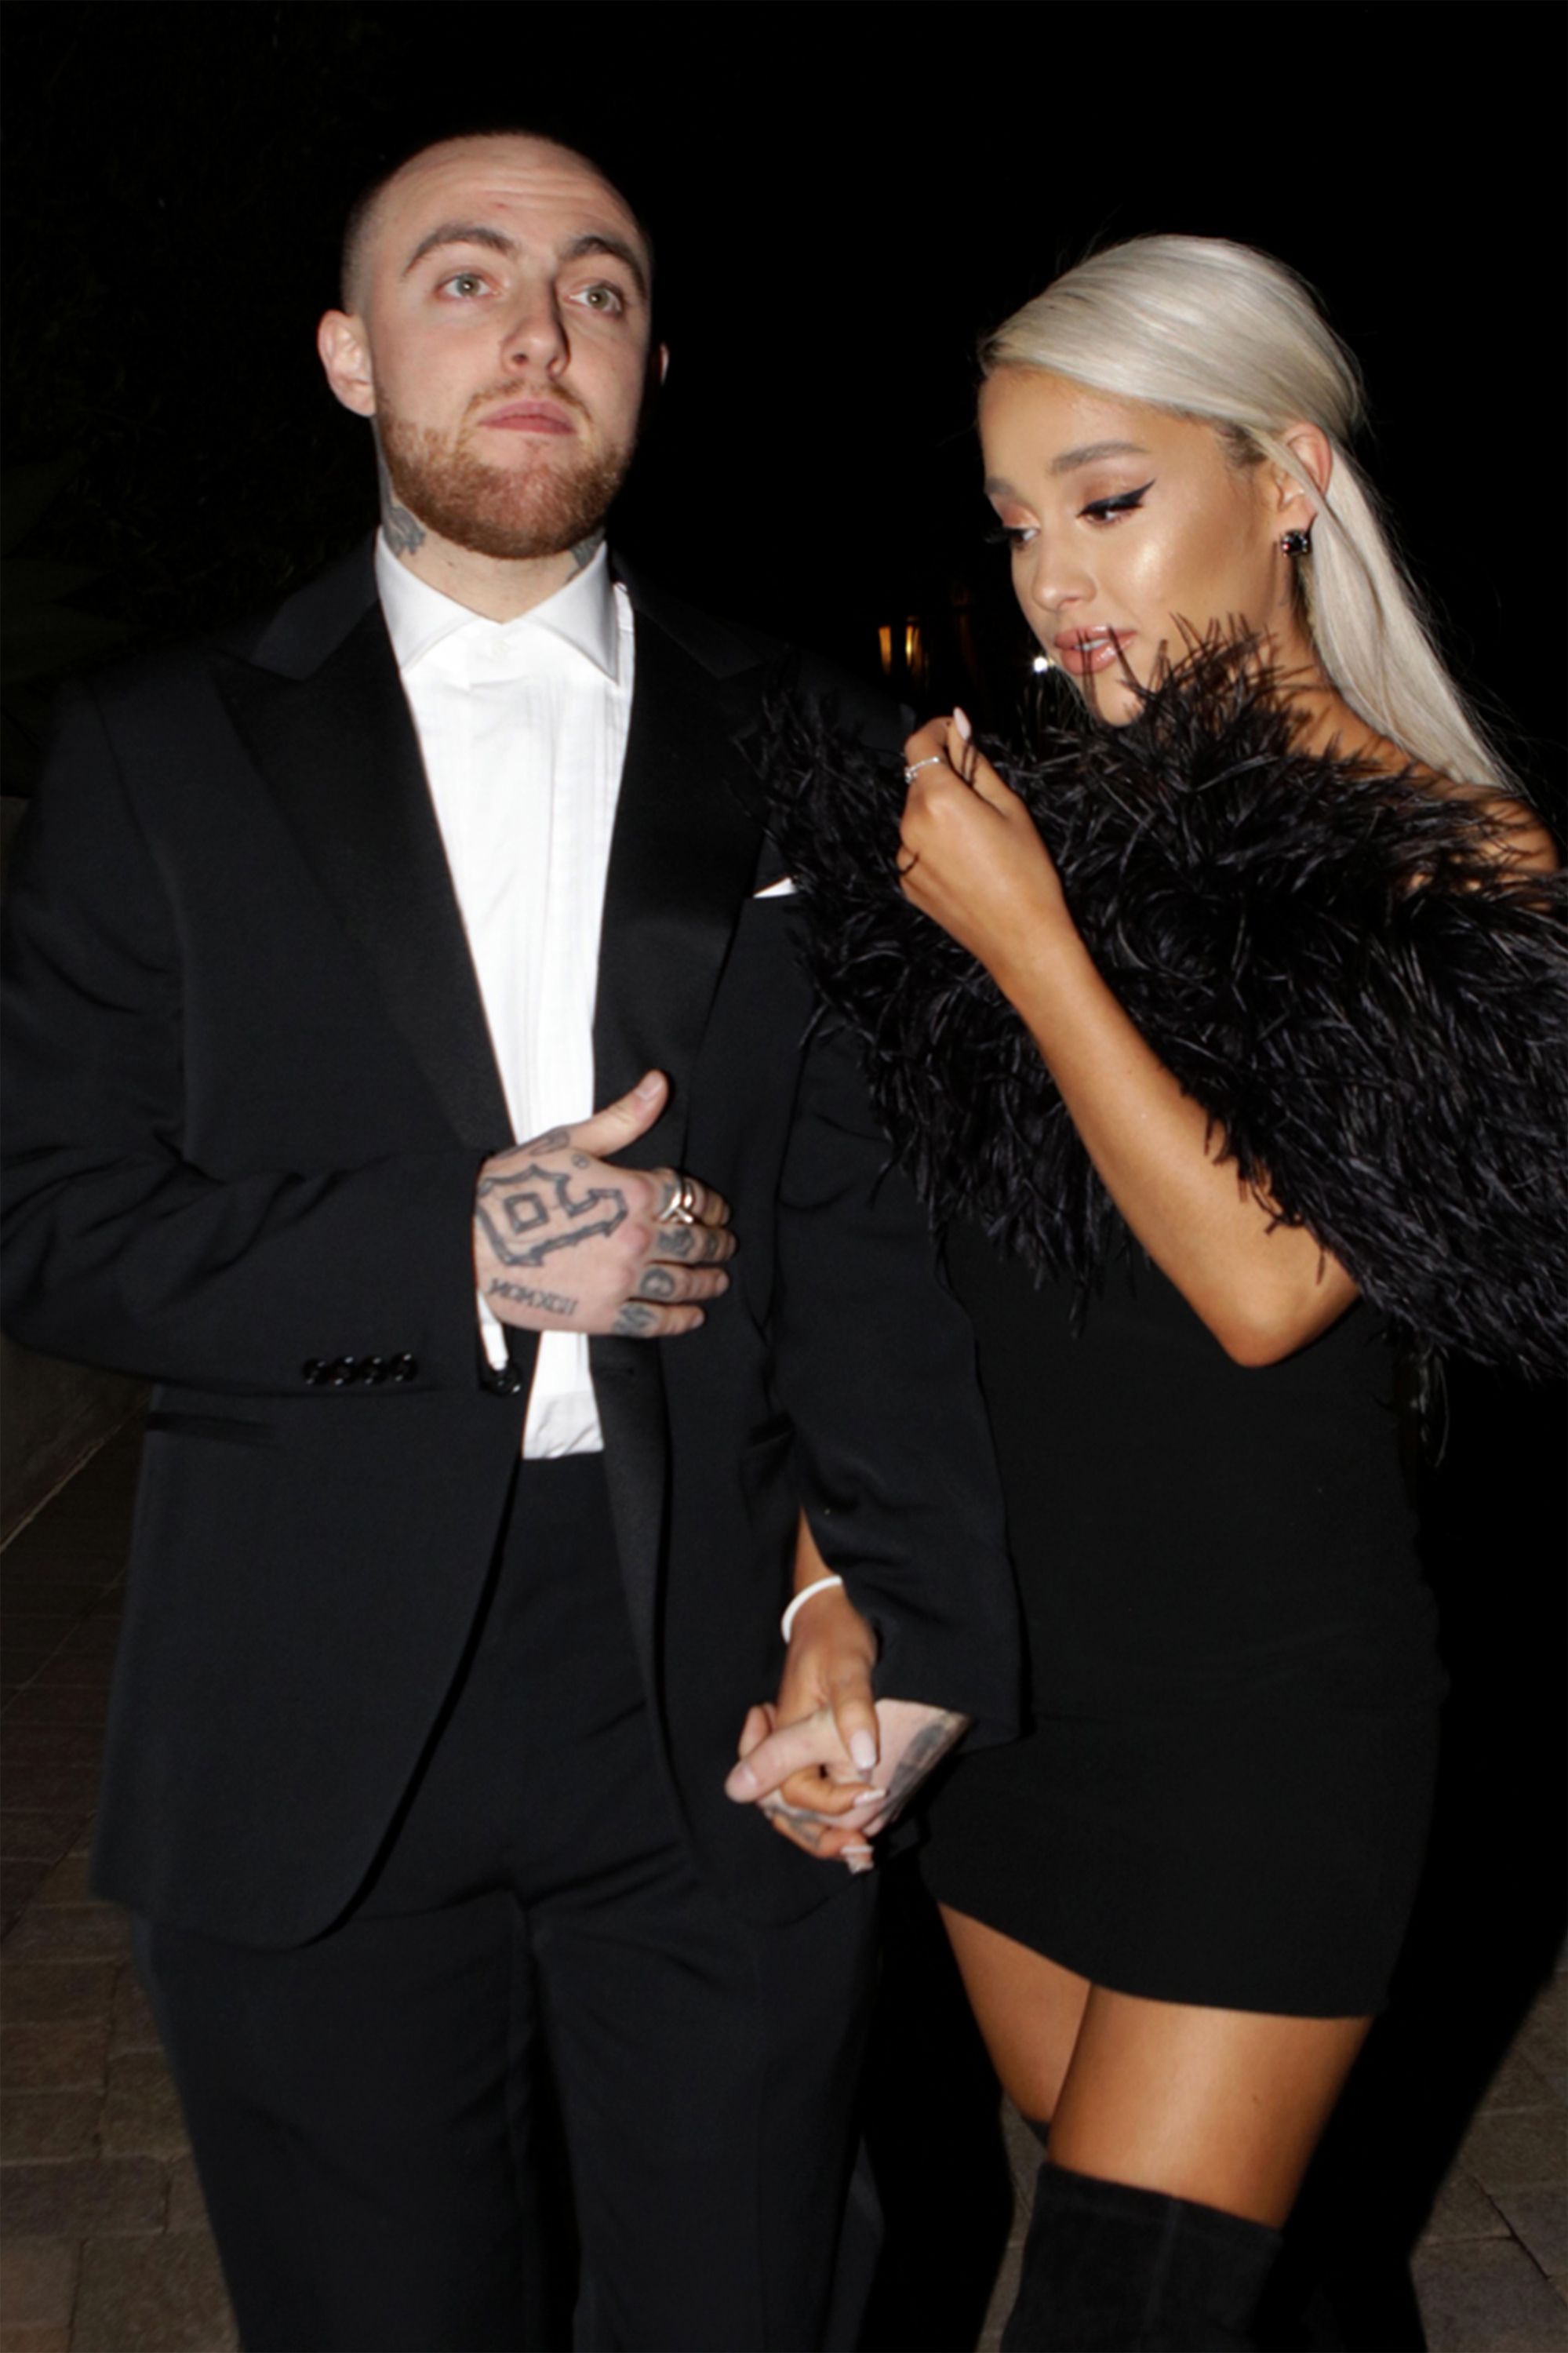 how long has mac and ariana been together